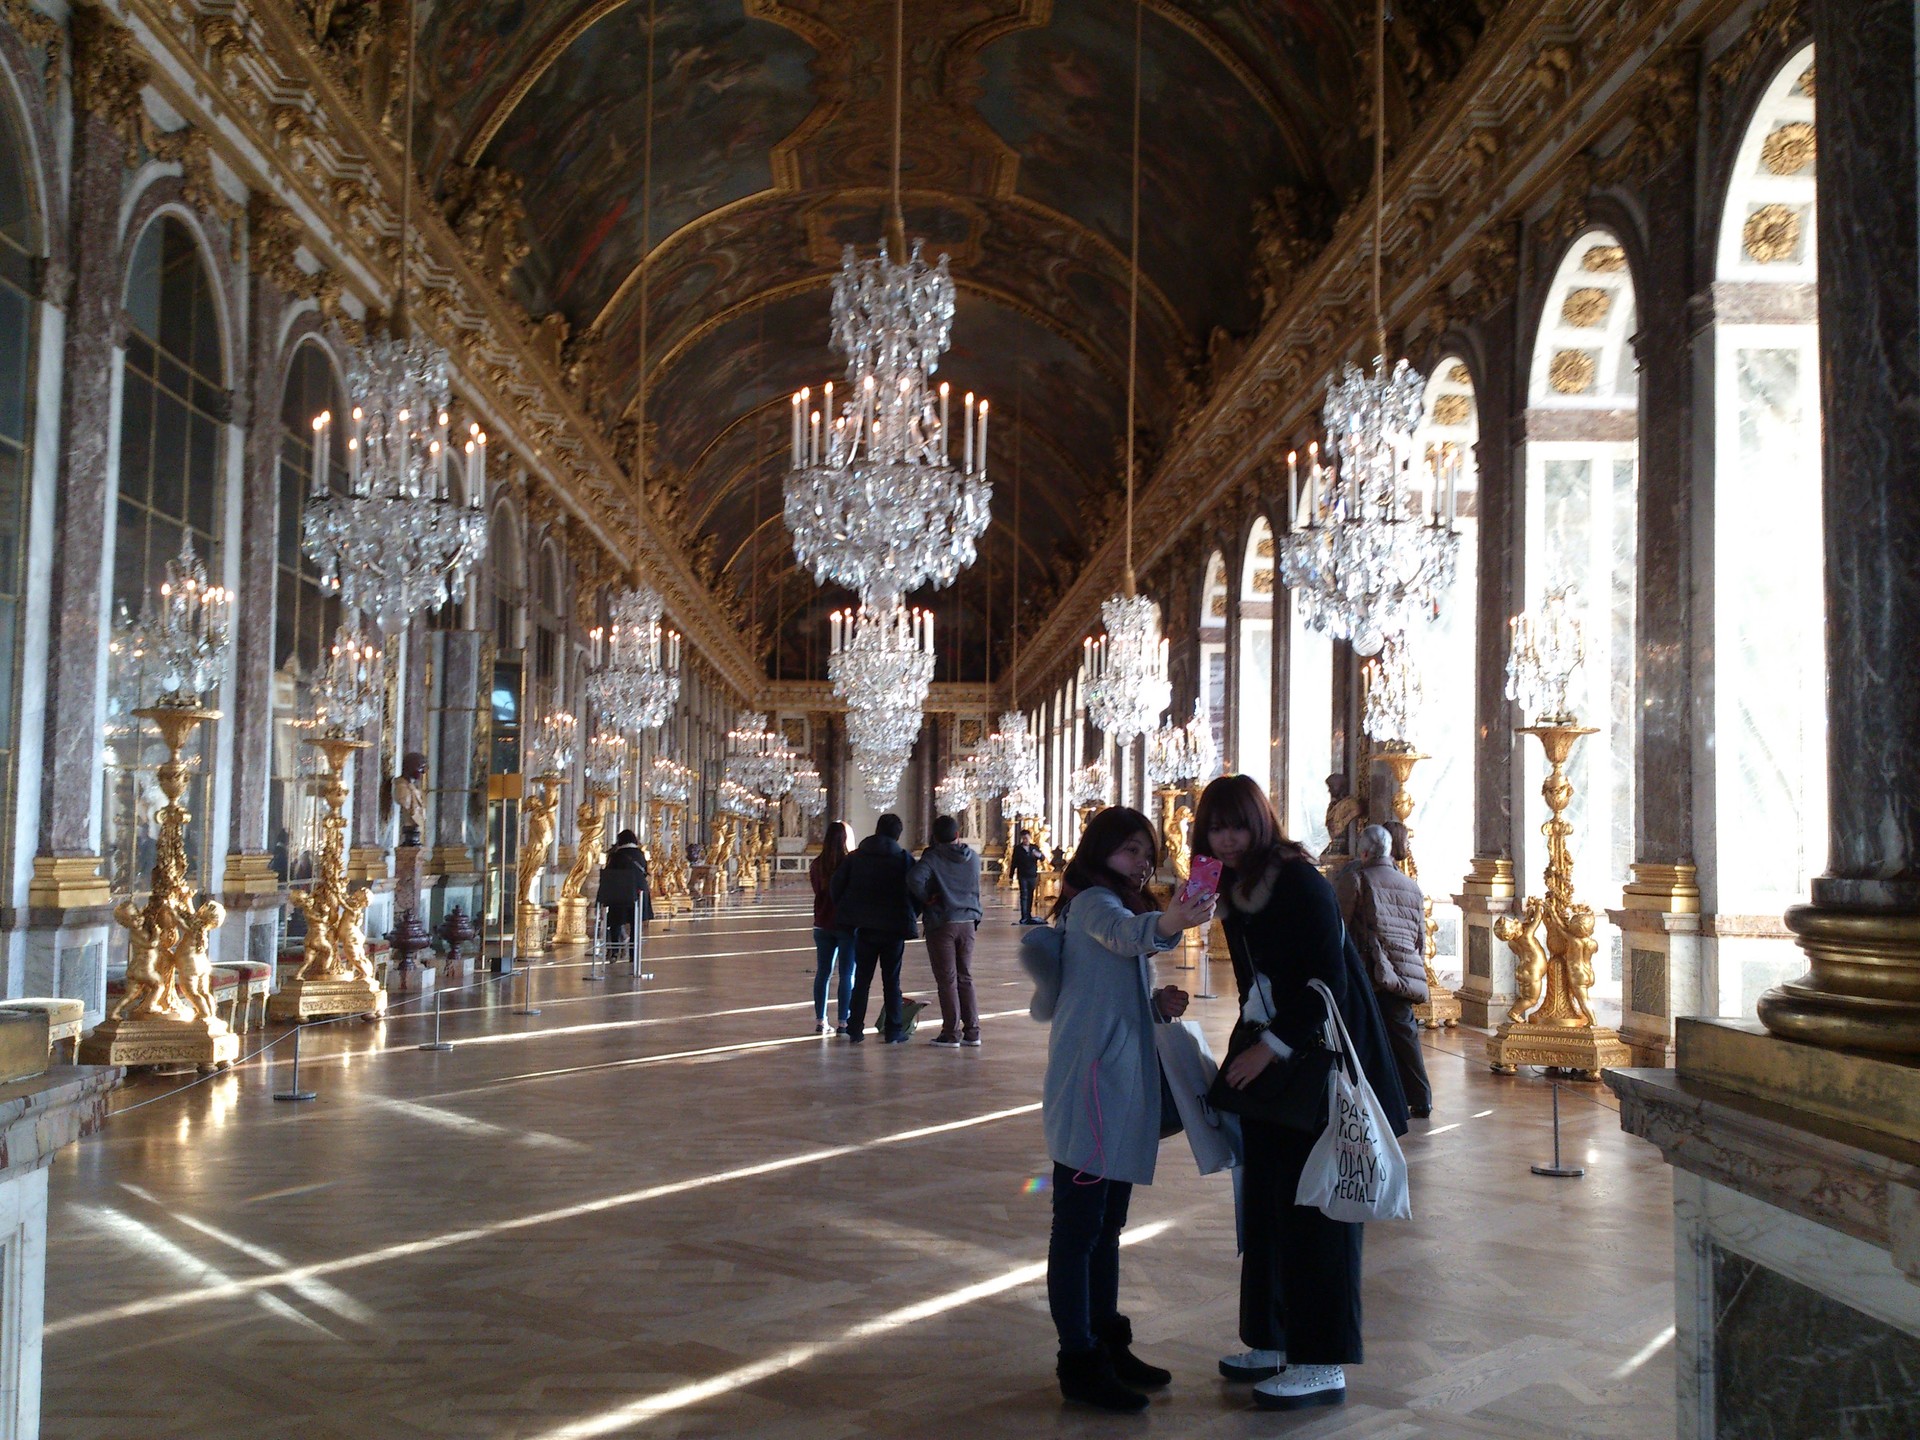 Experience the Palace of Versailles